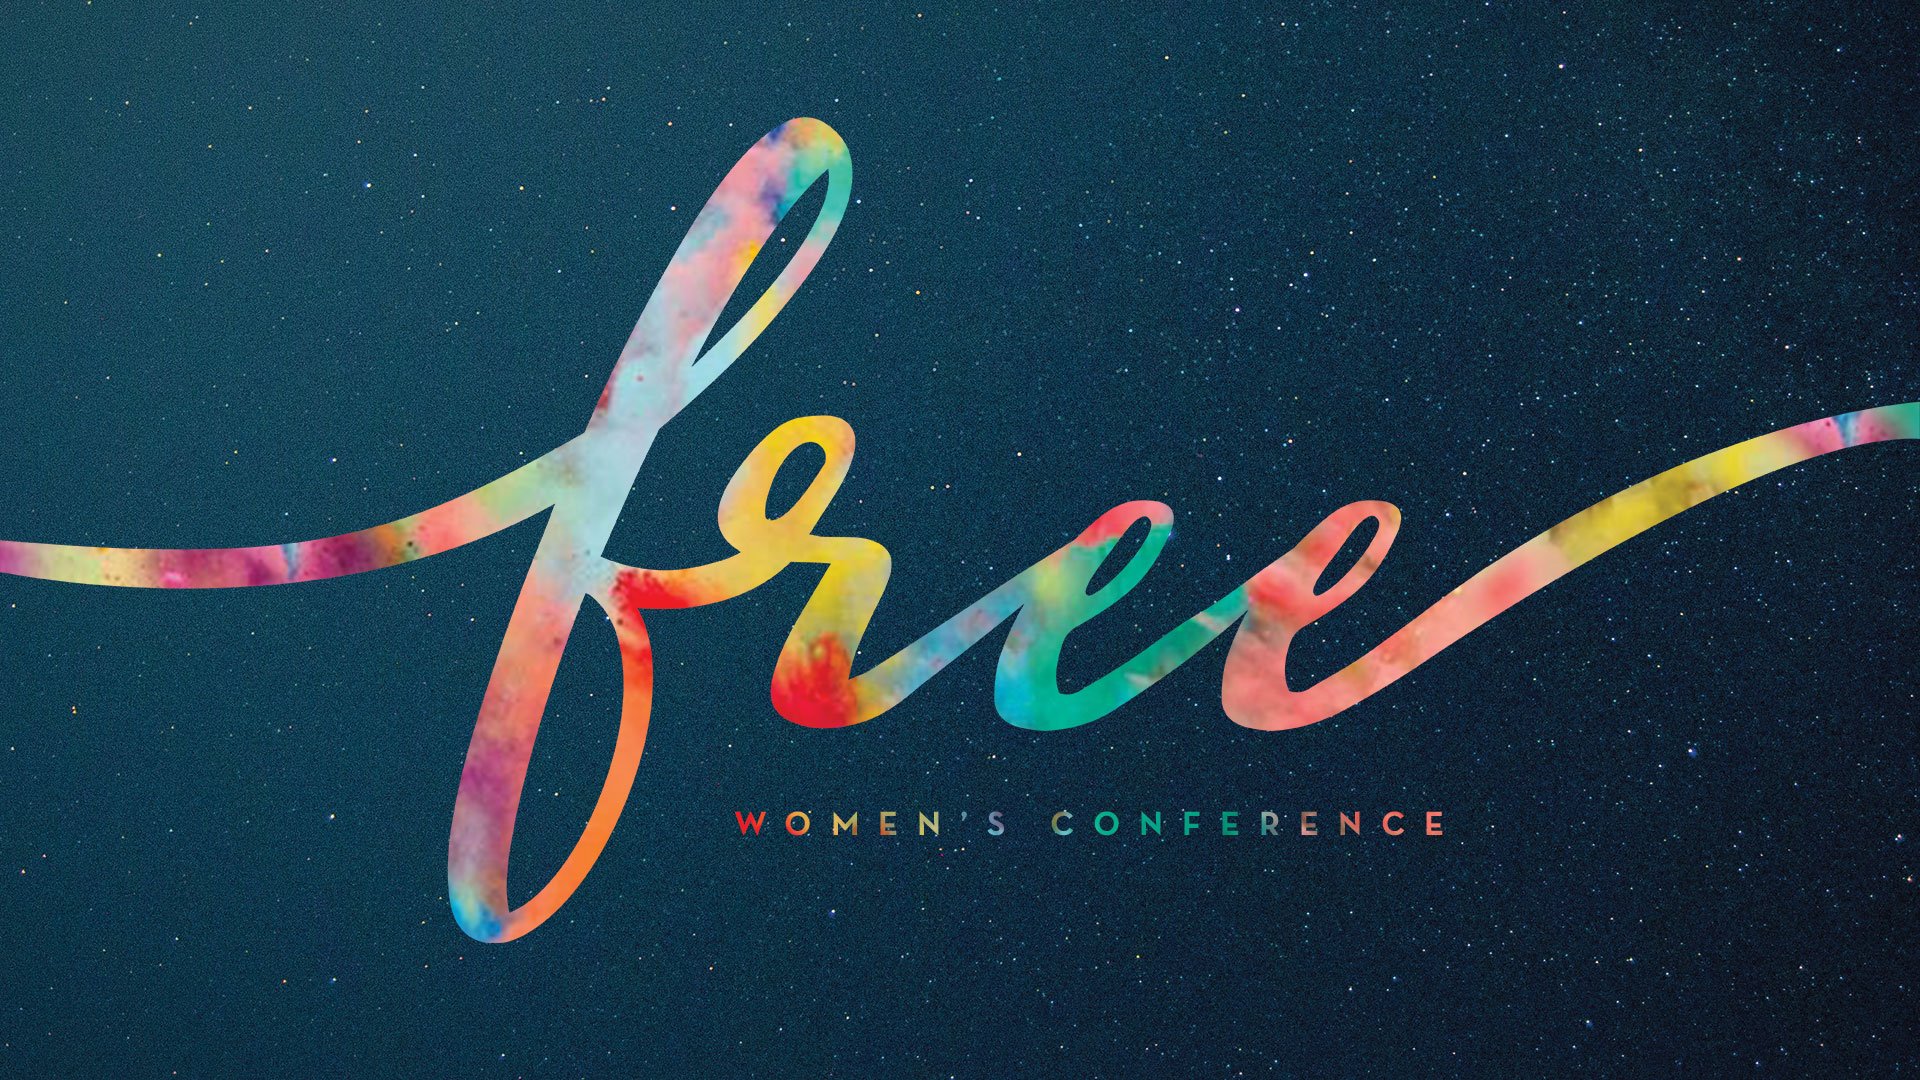 TRADERS POINT | WOMEN'S CONFERENCE 2017